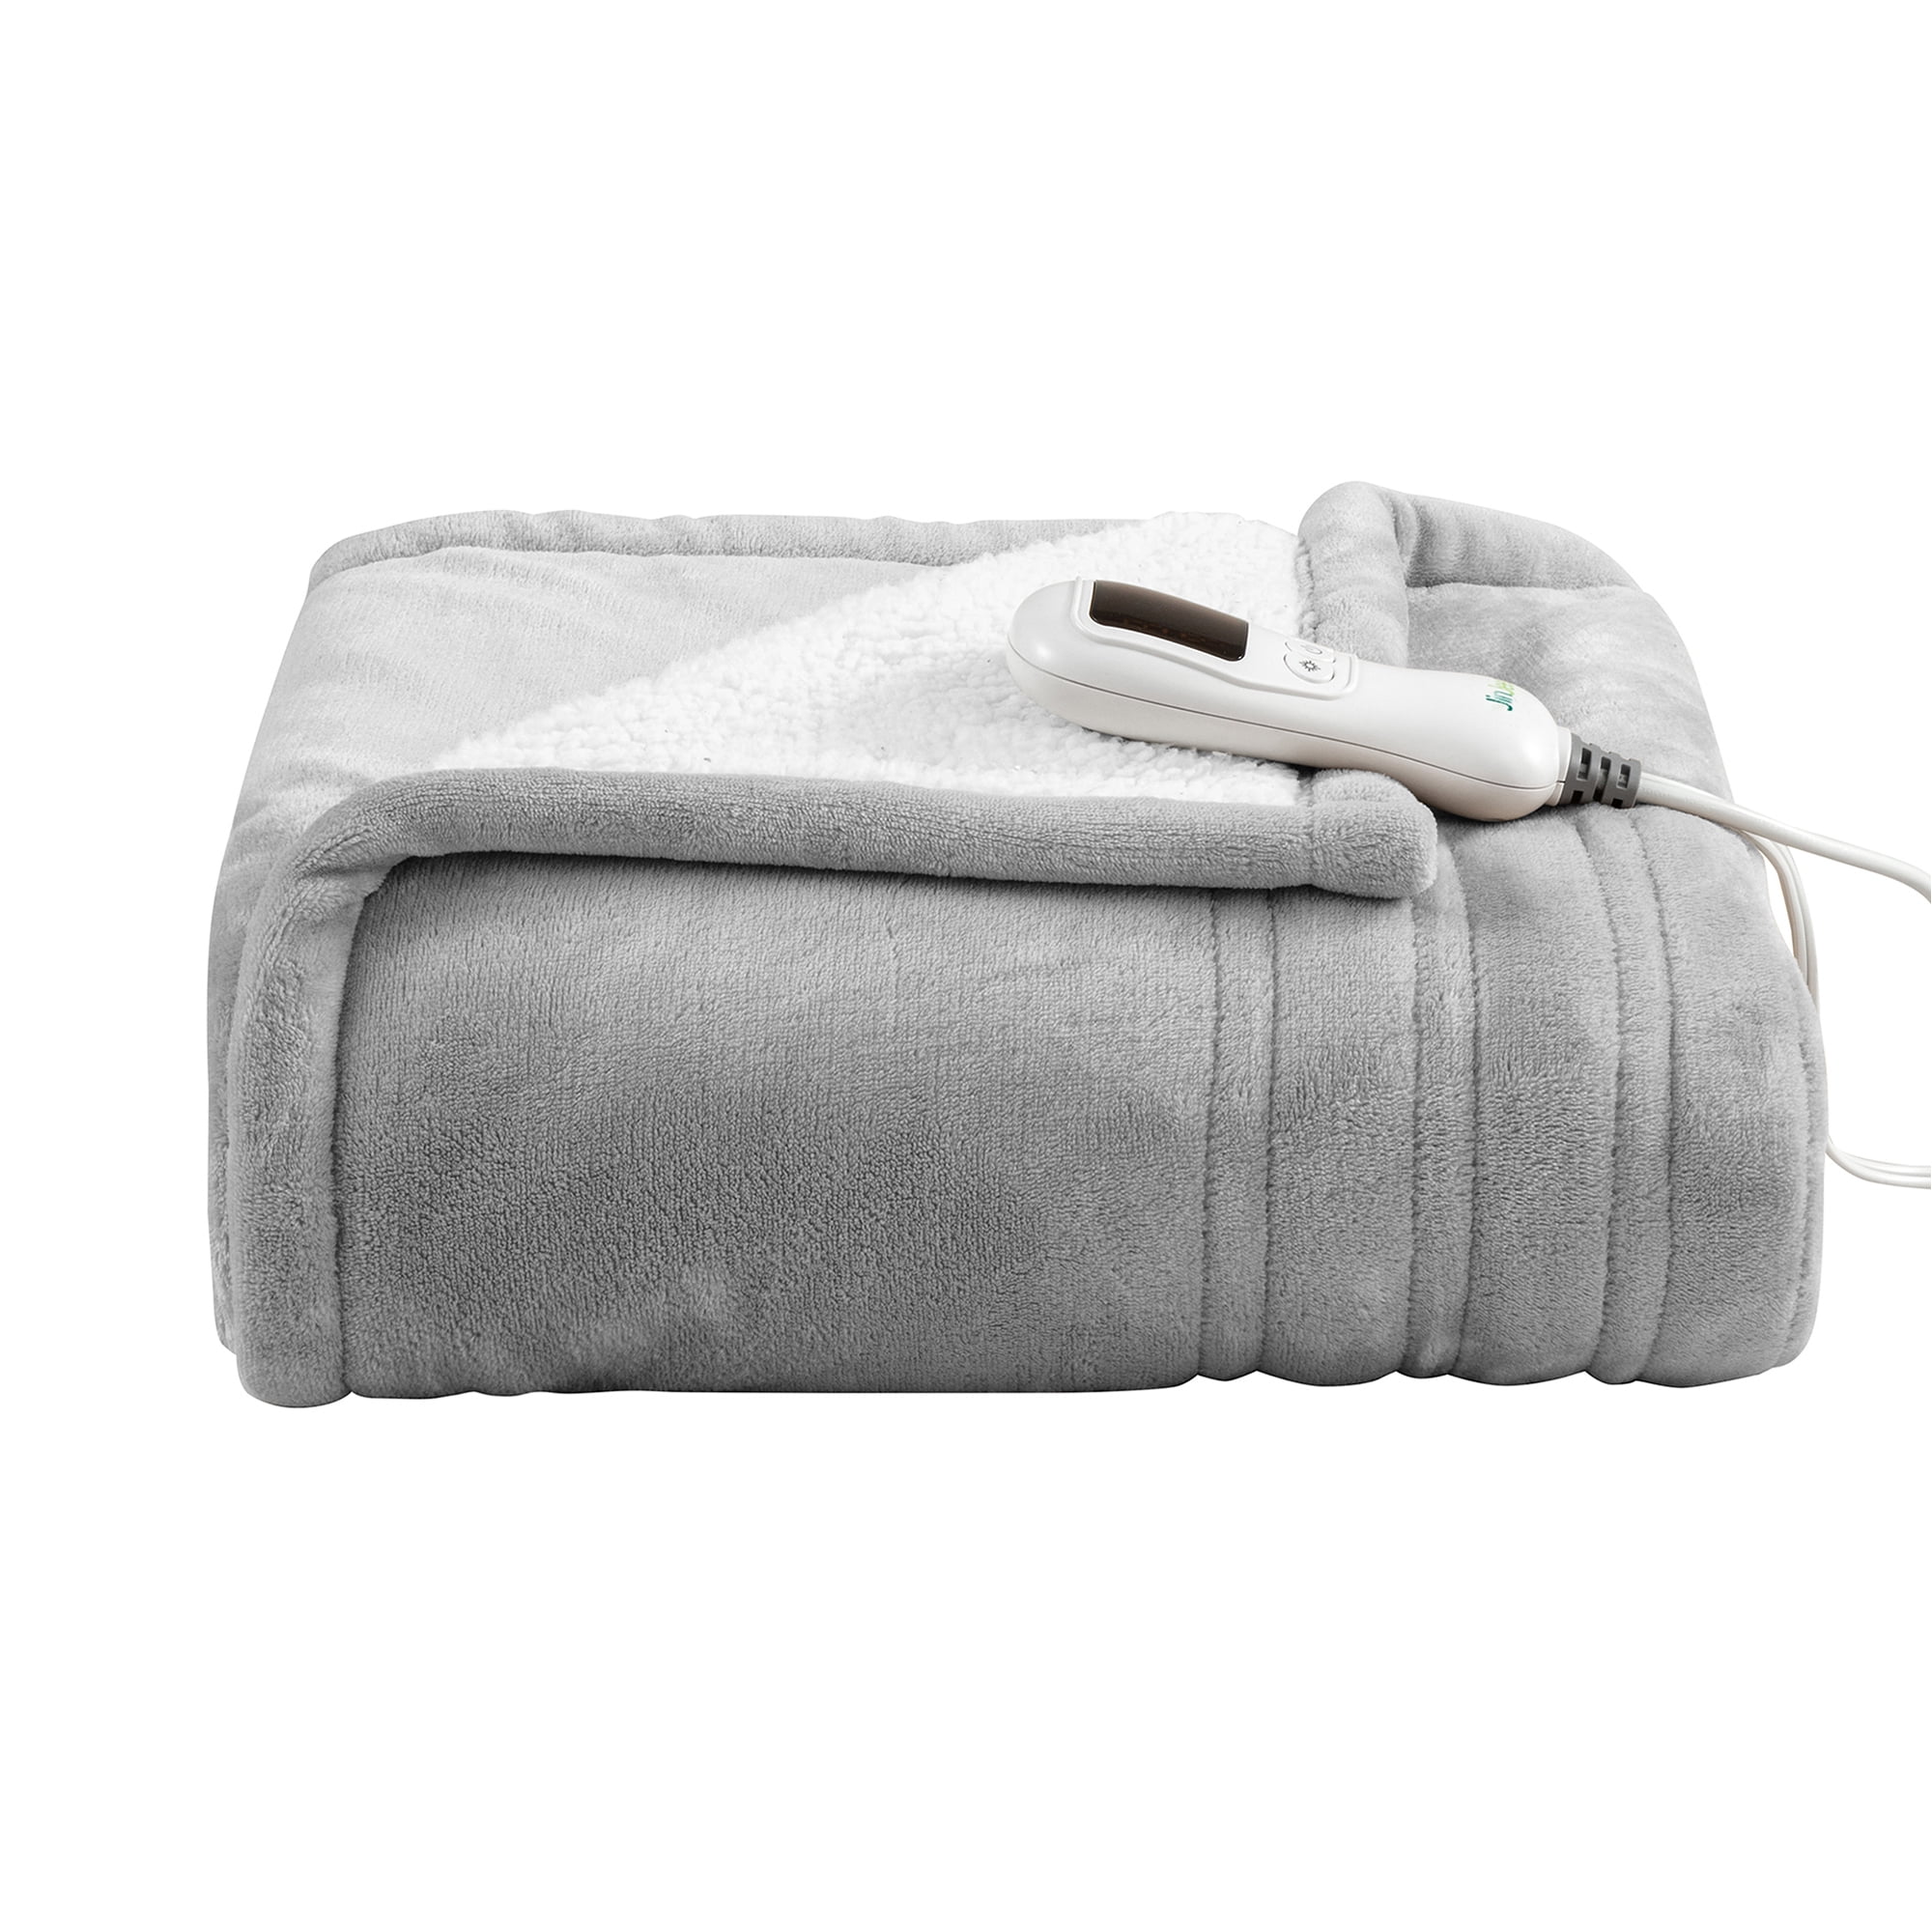 Grey Soft Flannel Sherpa Full Body Warming Heated Blanket Electric Throw  Blanket TK1011 - The Home Depot